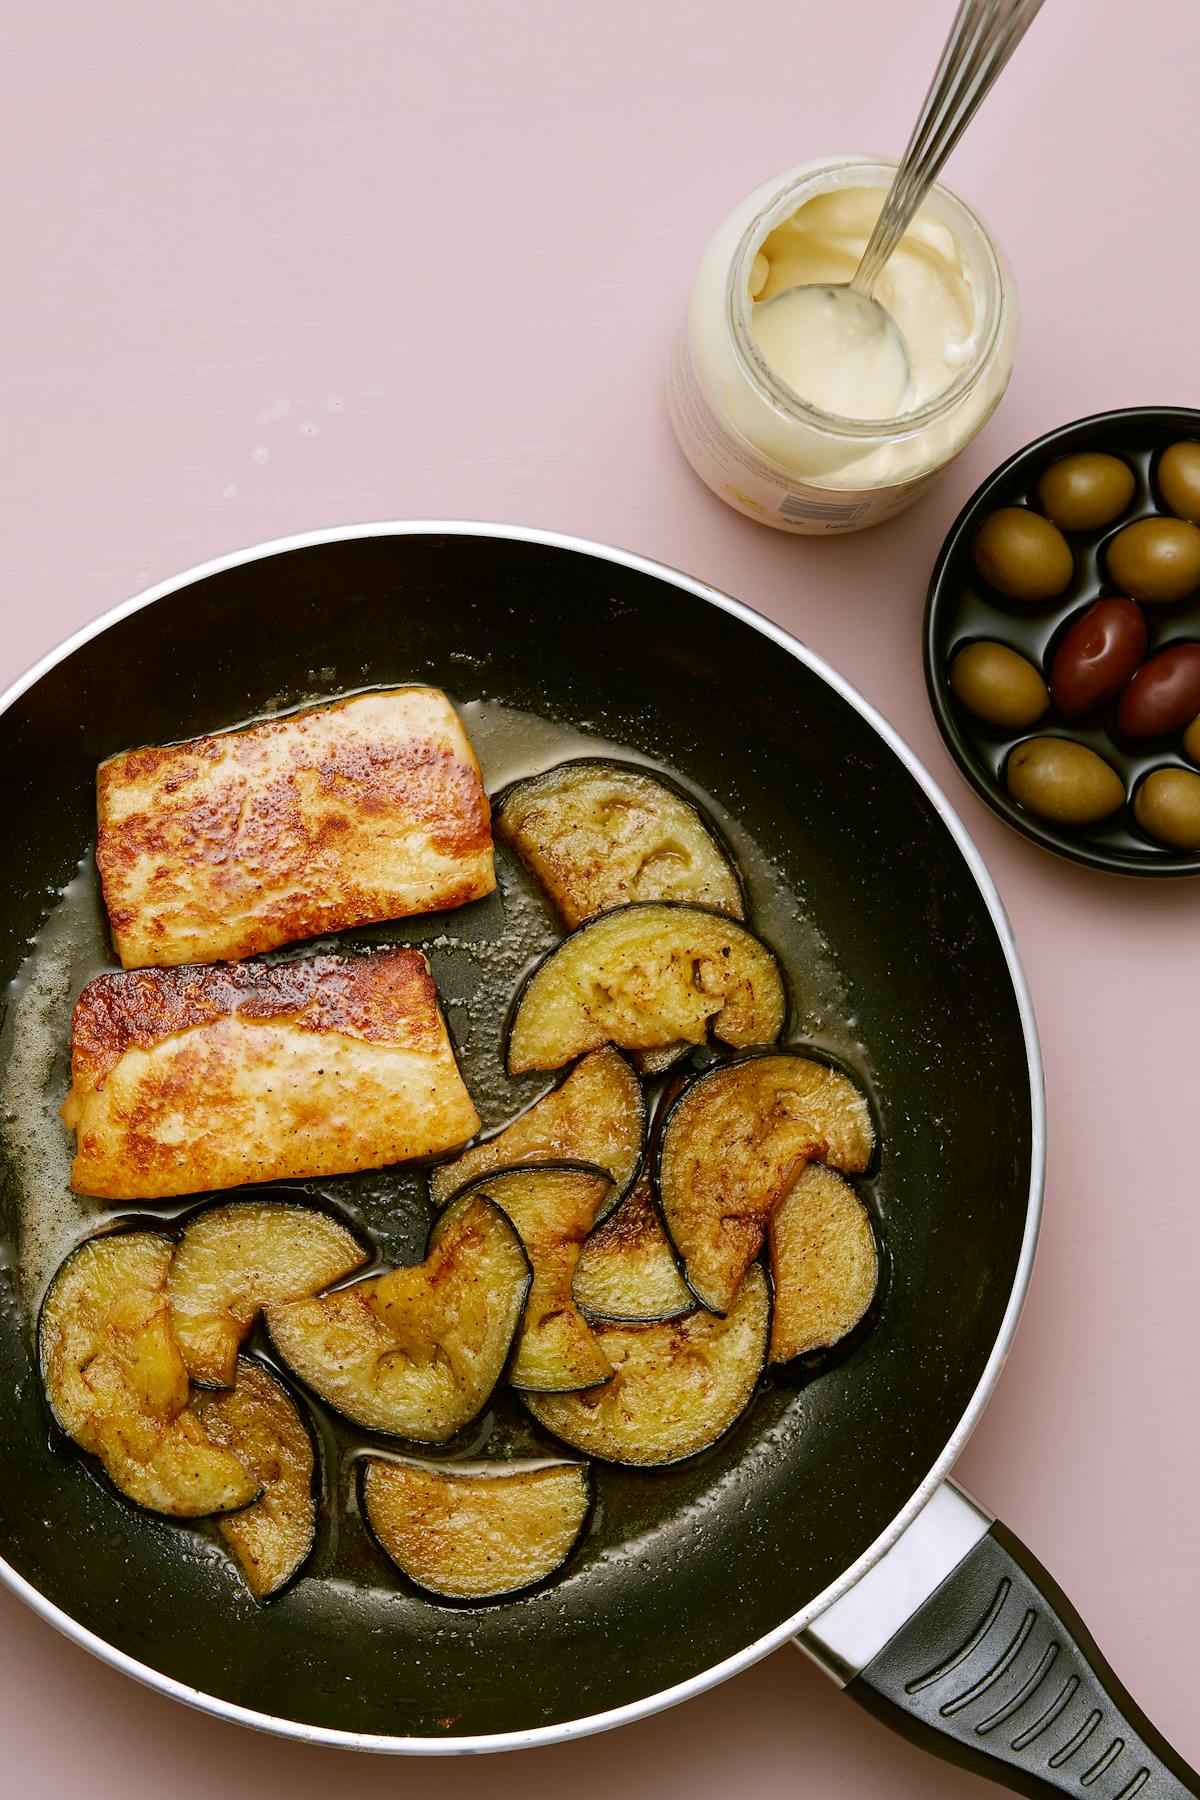 Halloumi cheese with butter-fried eggplant